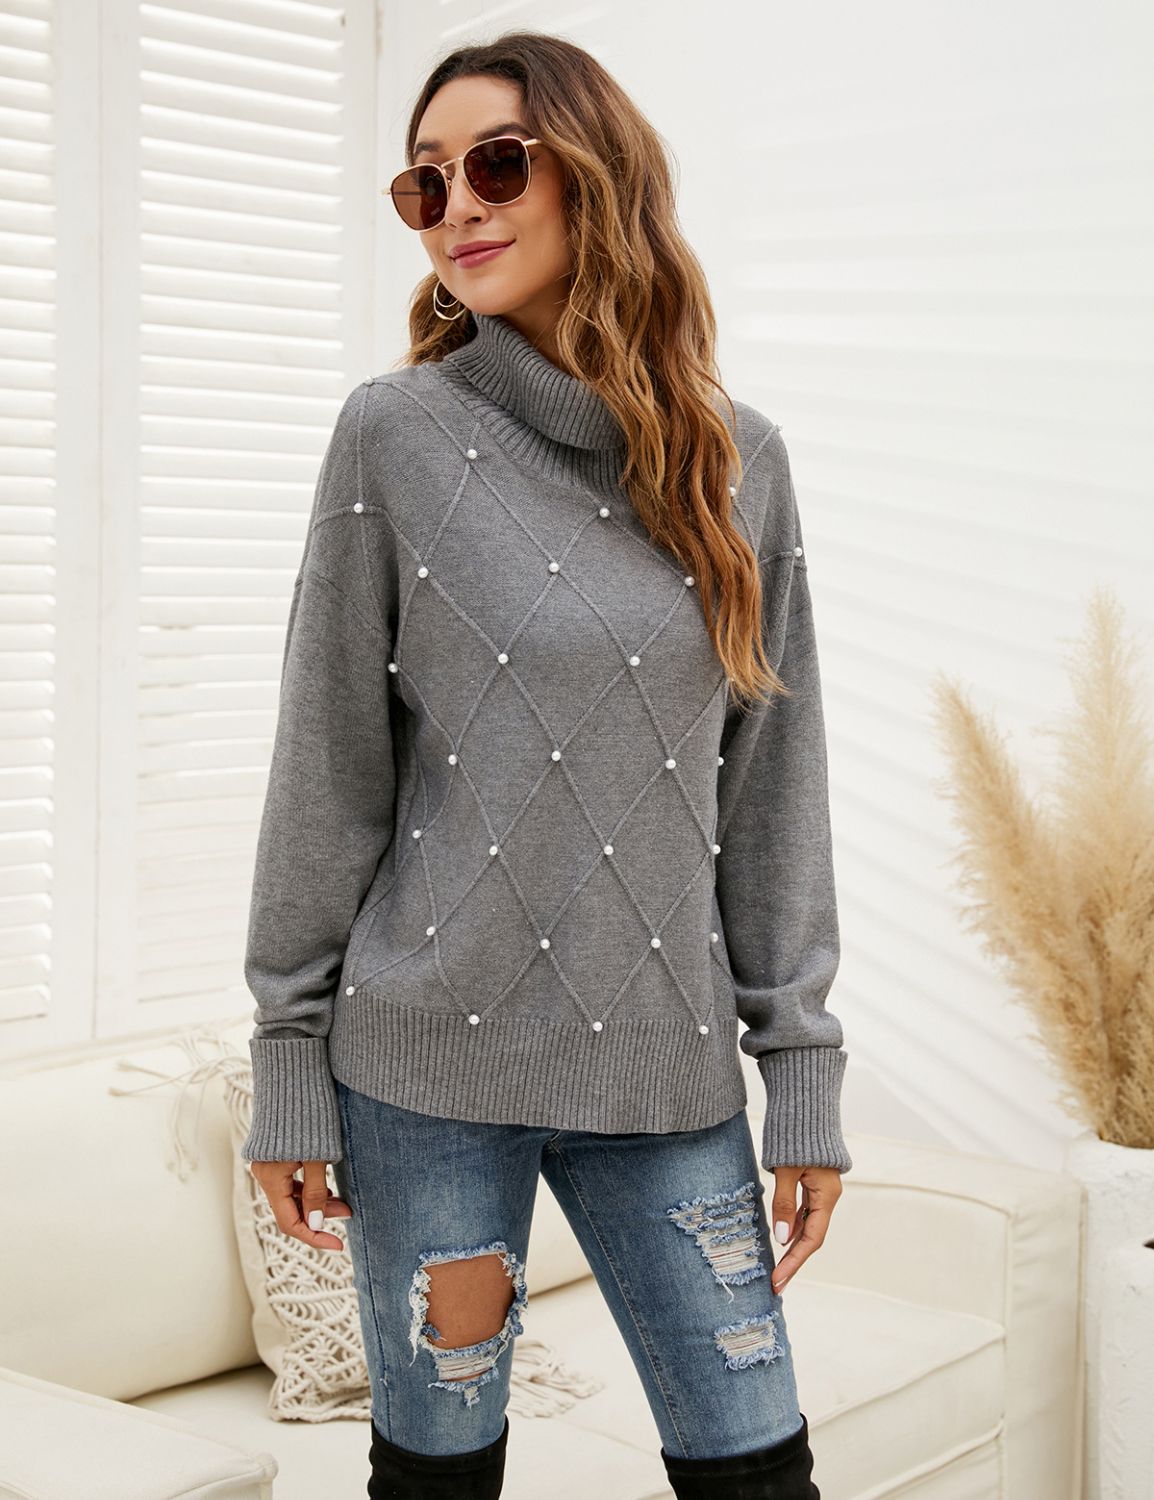 Cozy Turtle Neck Pullover Sweater with Pearls